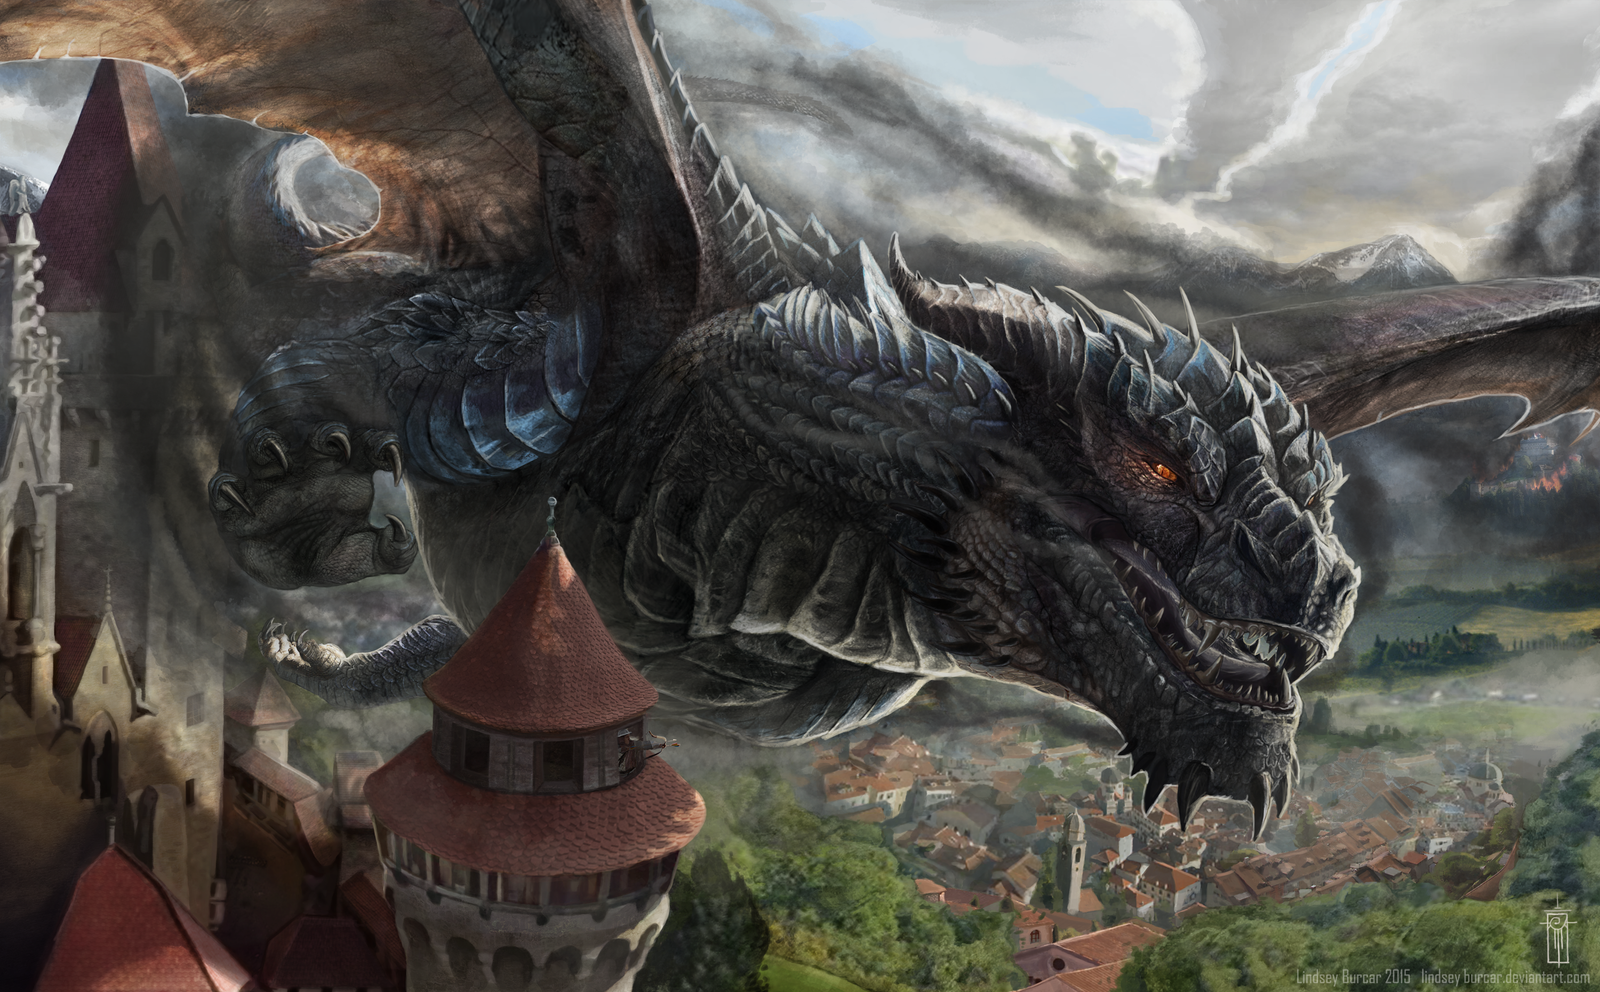 http://img14.deviantart.net/e6fd/i/2015/157/d/2/in_the_shadow_of_the_dragon_by_lindseyburcar-d8m2vcu.png